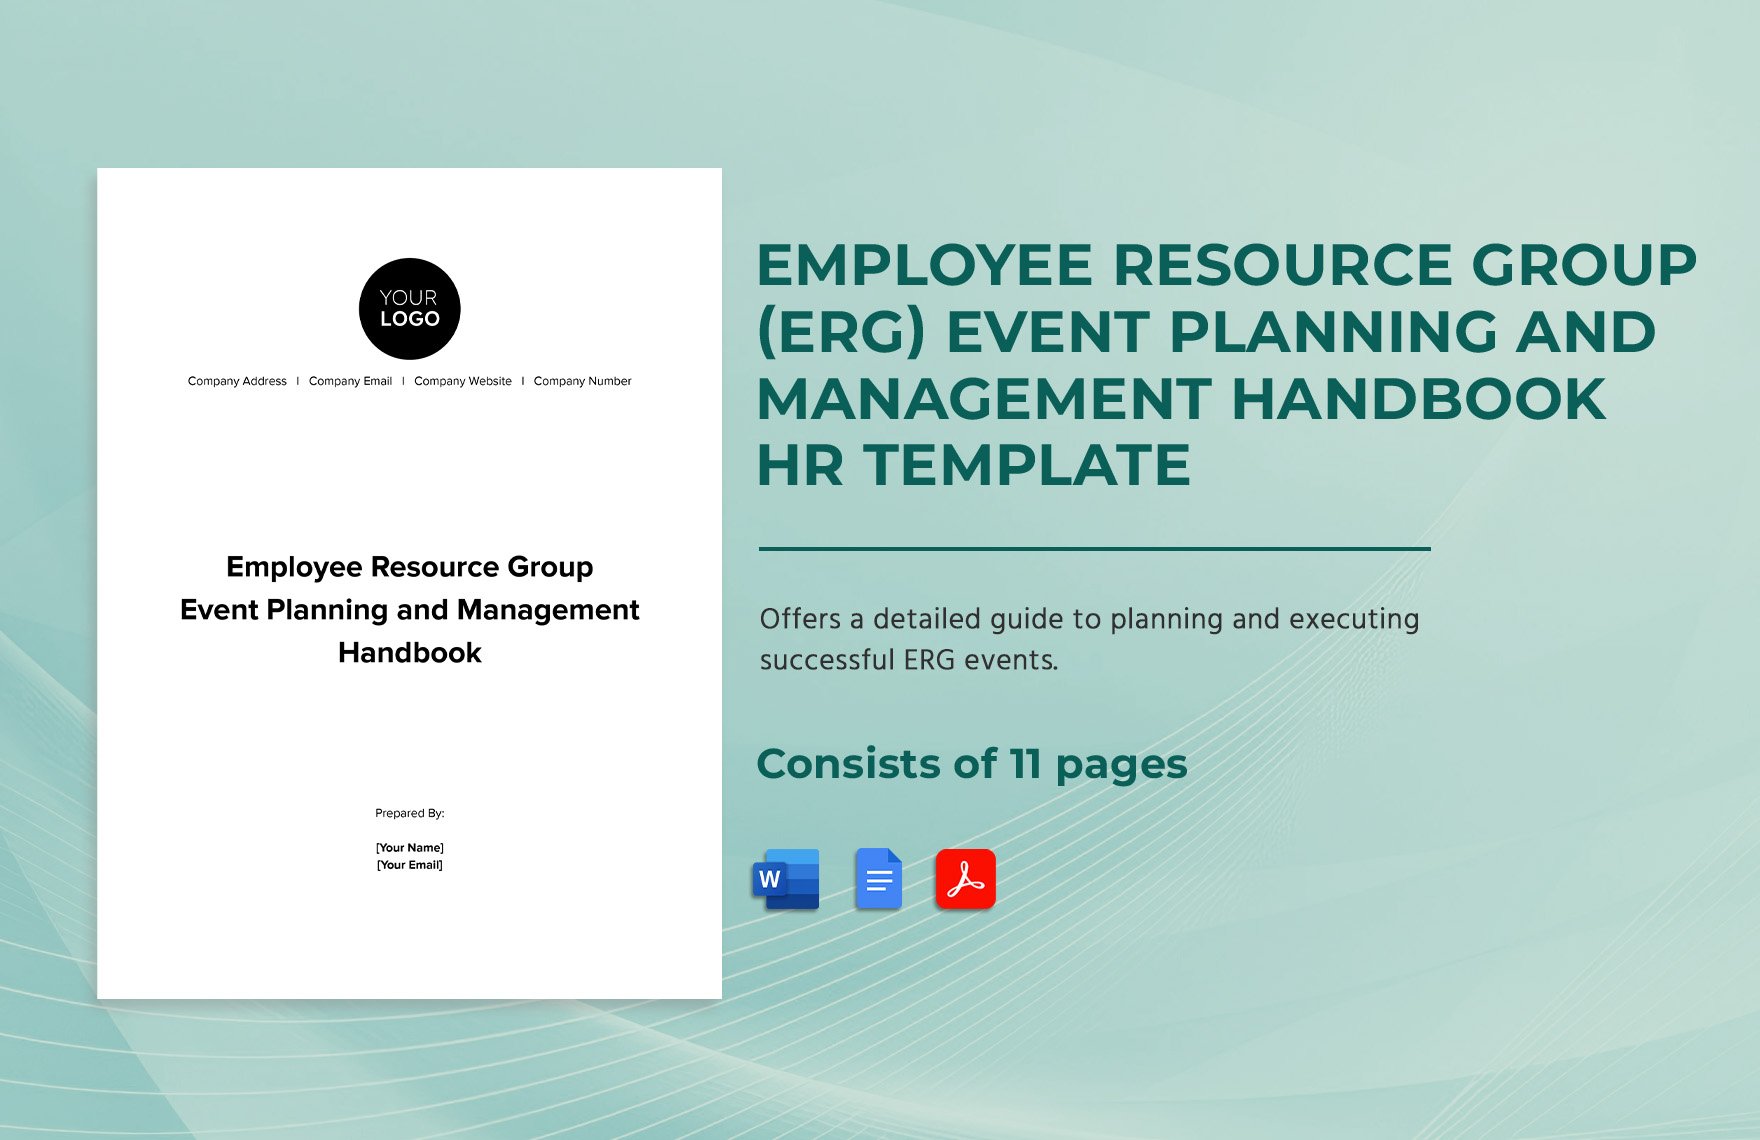 Employee Resource Group Event Planning and Management Handbook HR Template in Word, Google Docs, PDF